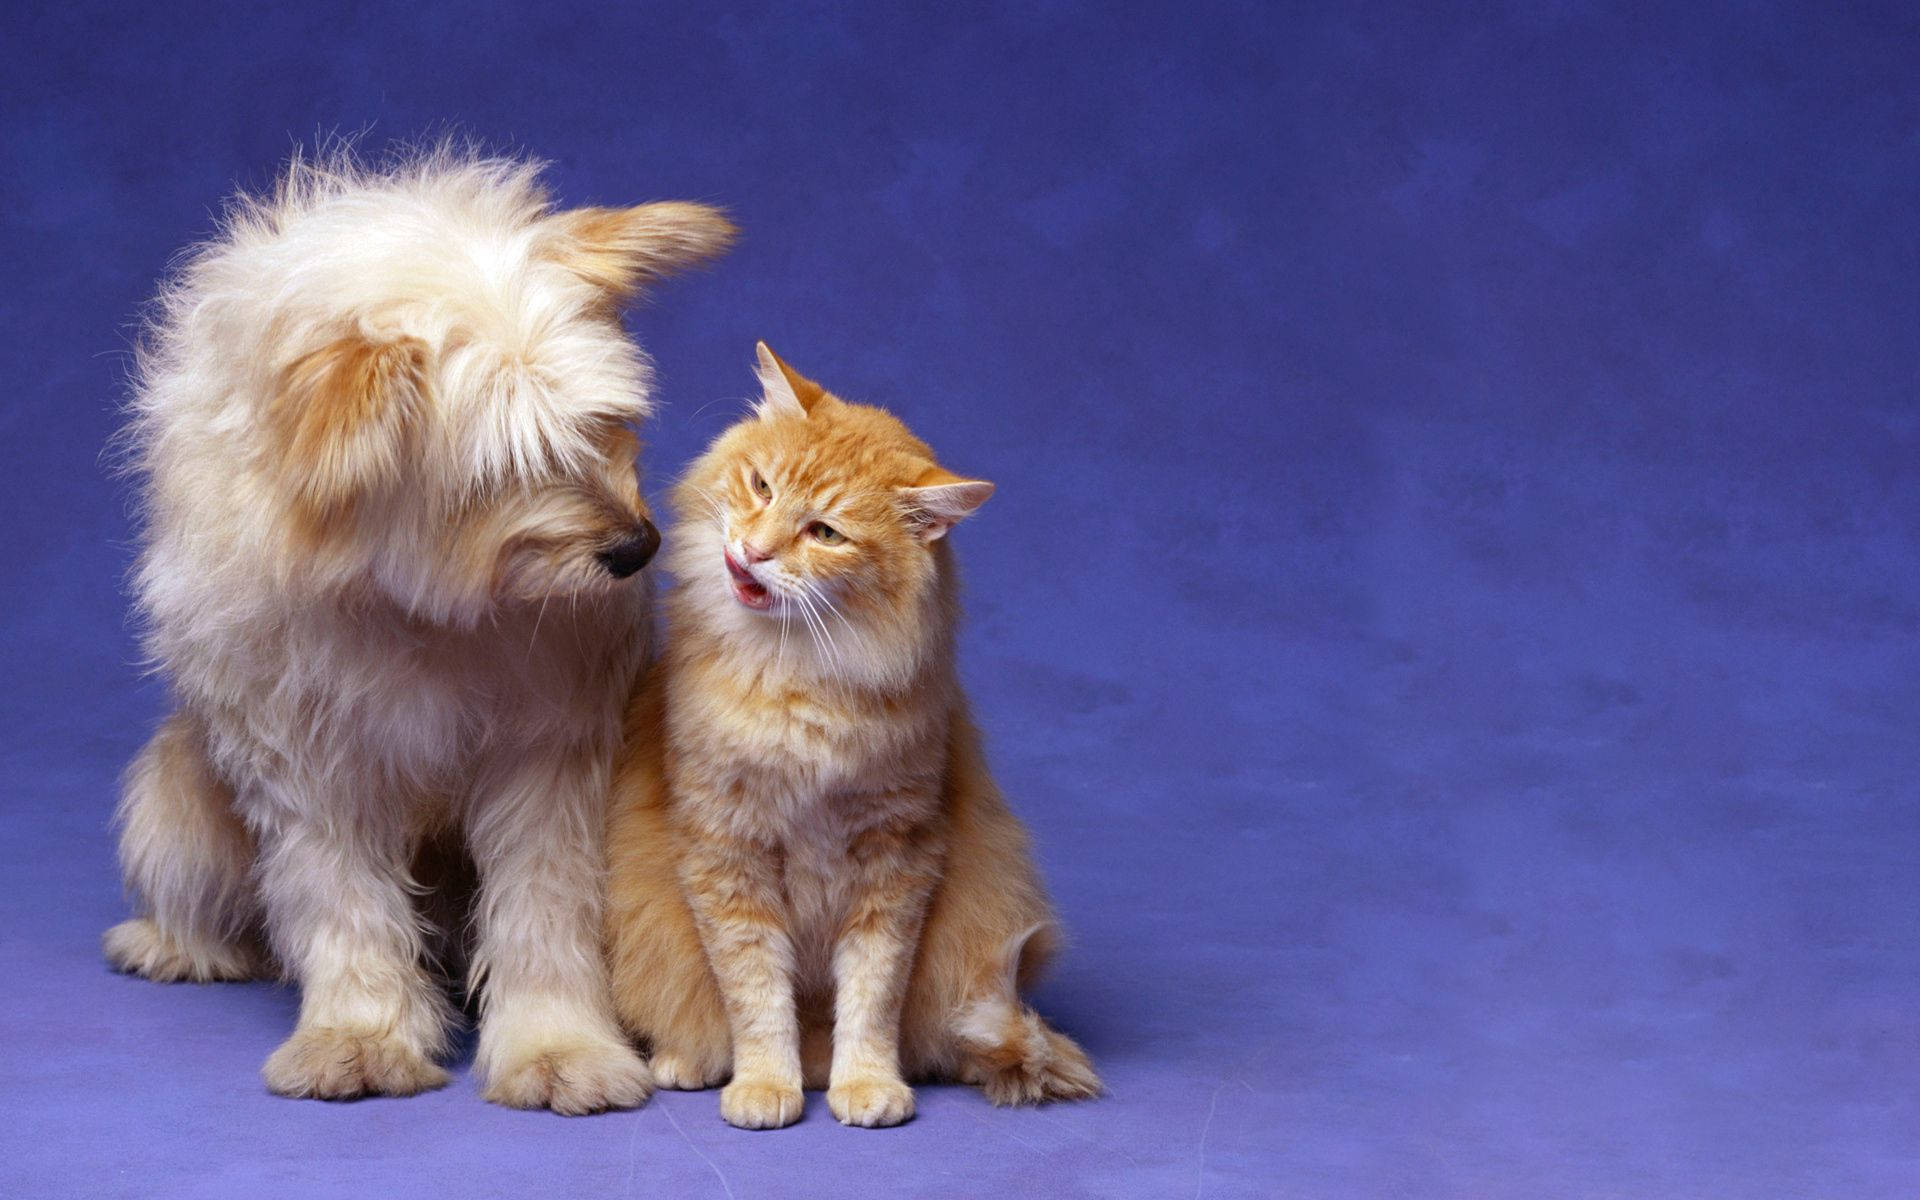 Friendship Cat And Dog Wallpaper